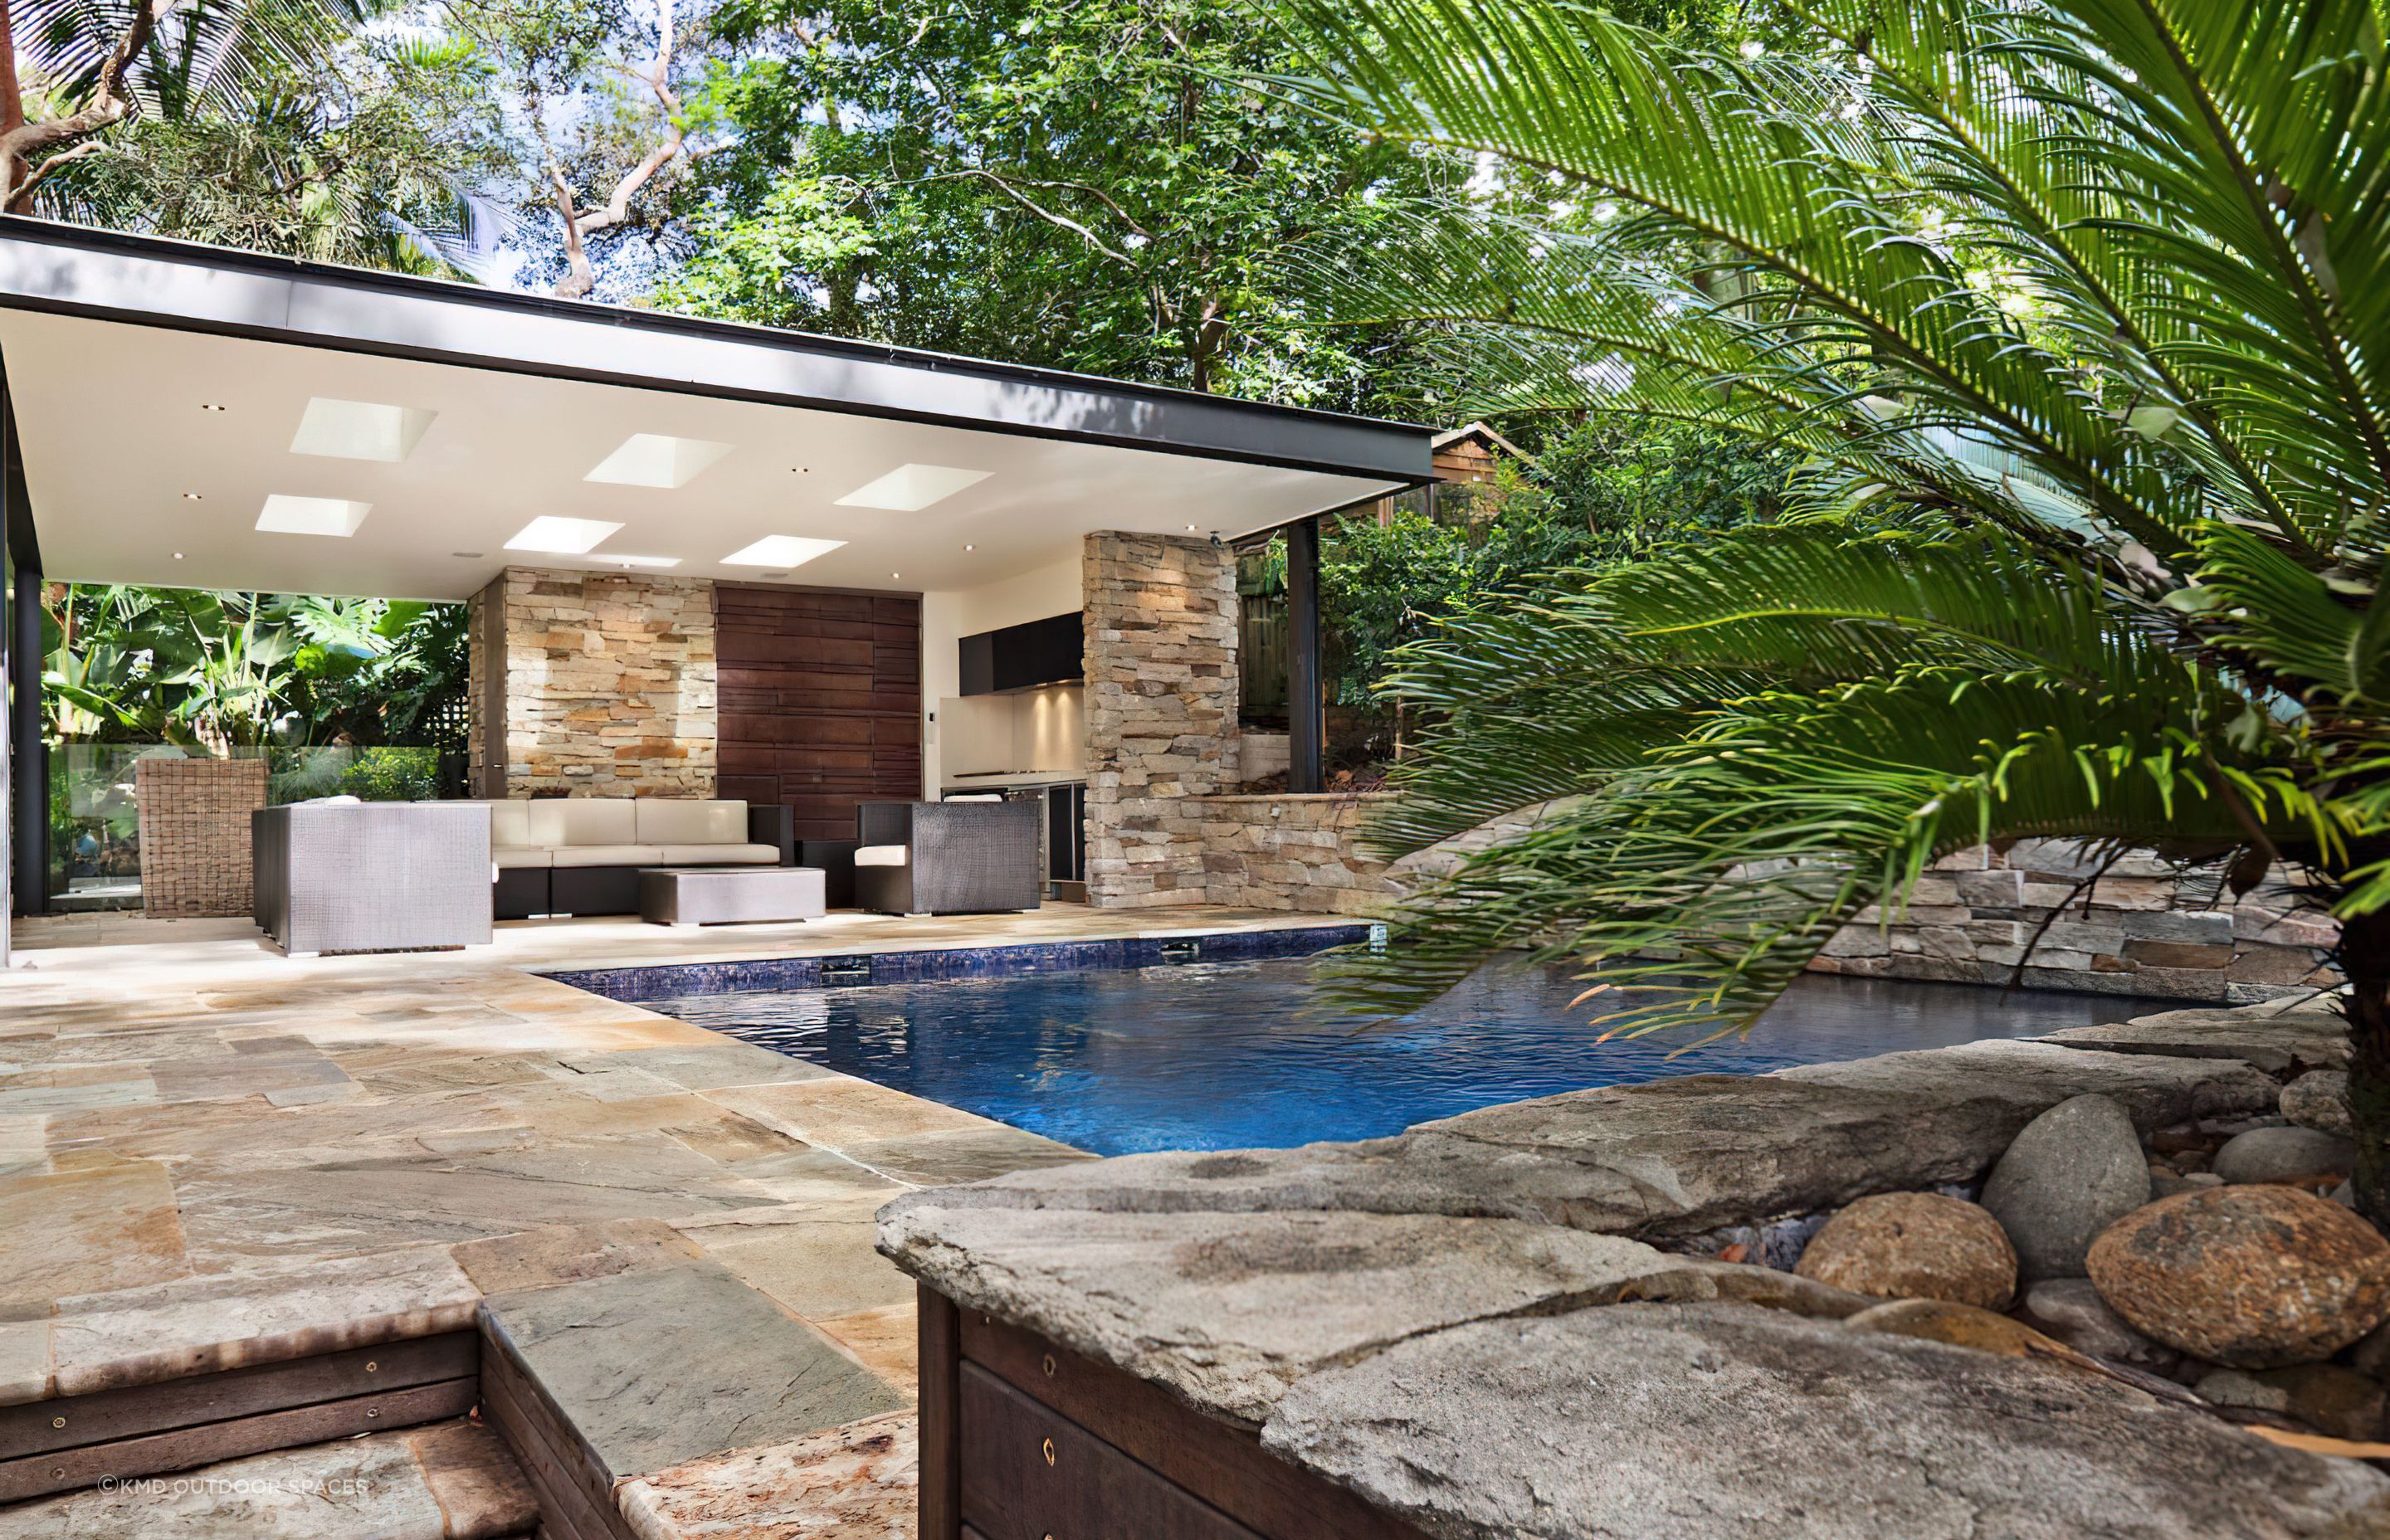 A stone wall can transform your pool into a lush natural feeling oasis. Featured project: Lindfield.